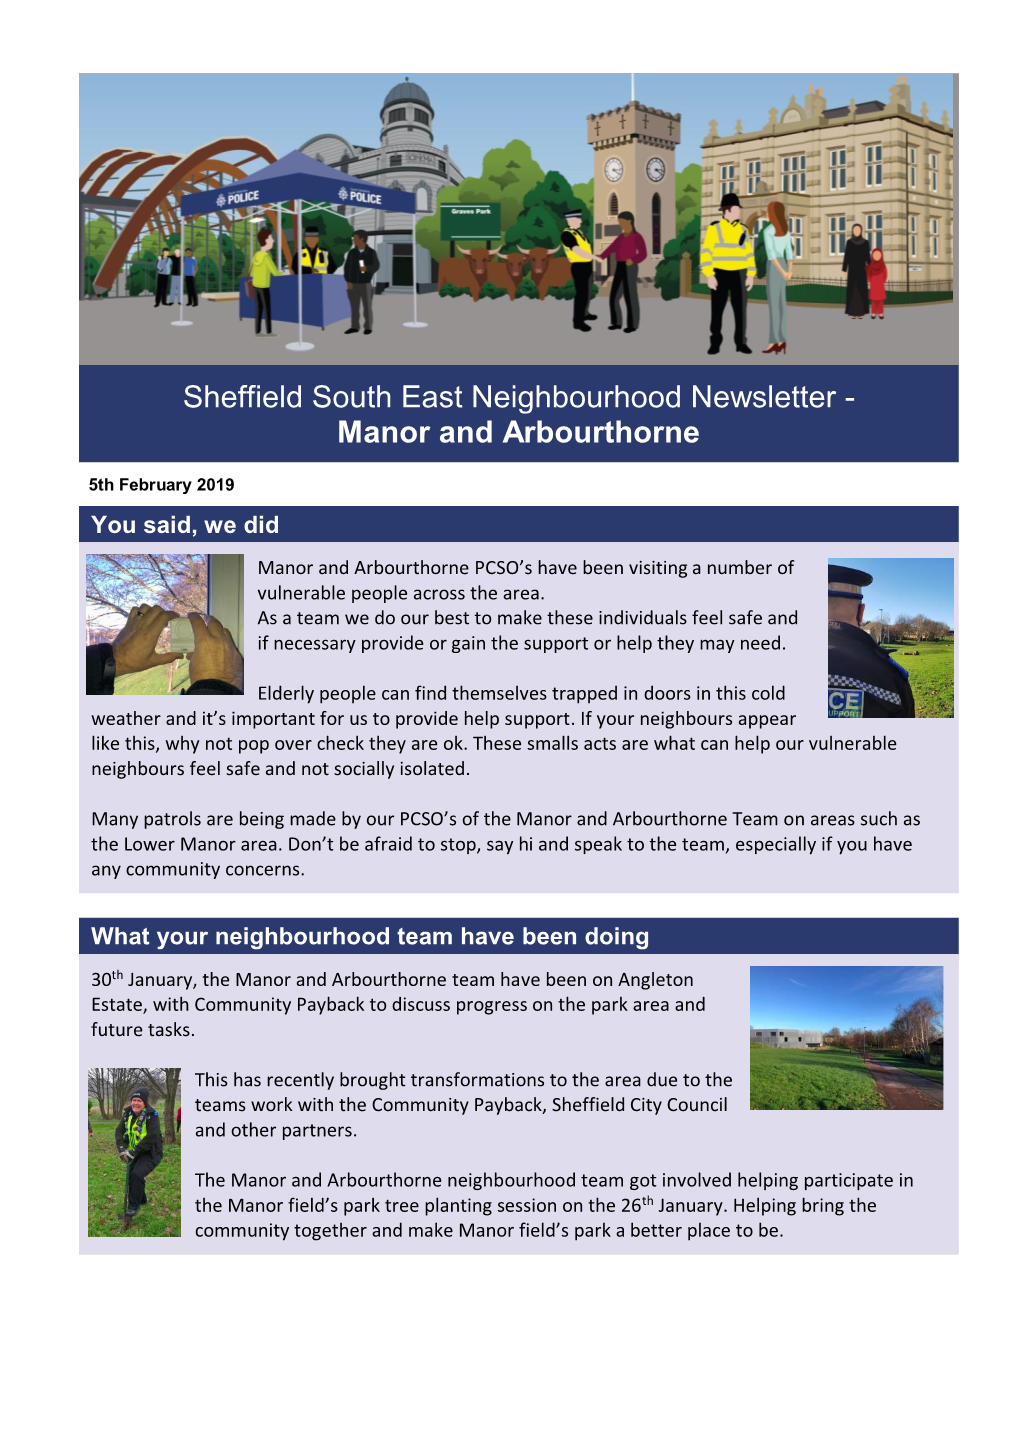 Sheffield South East Neighbourhood Newsletter - Manor and Arbourthorne